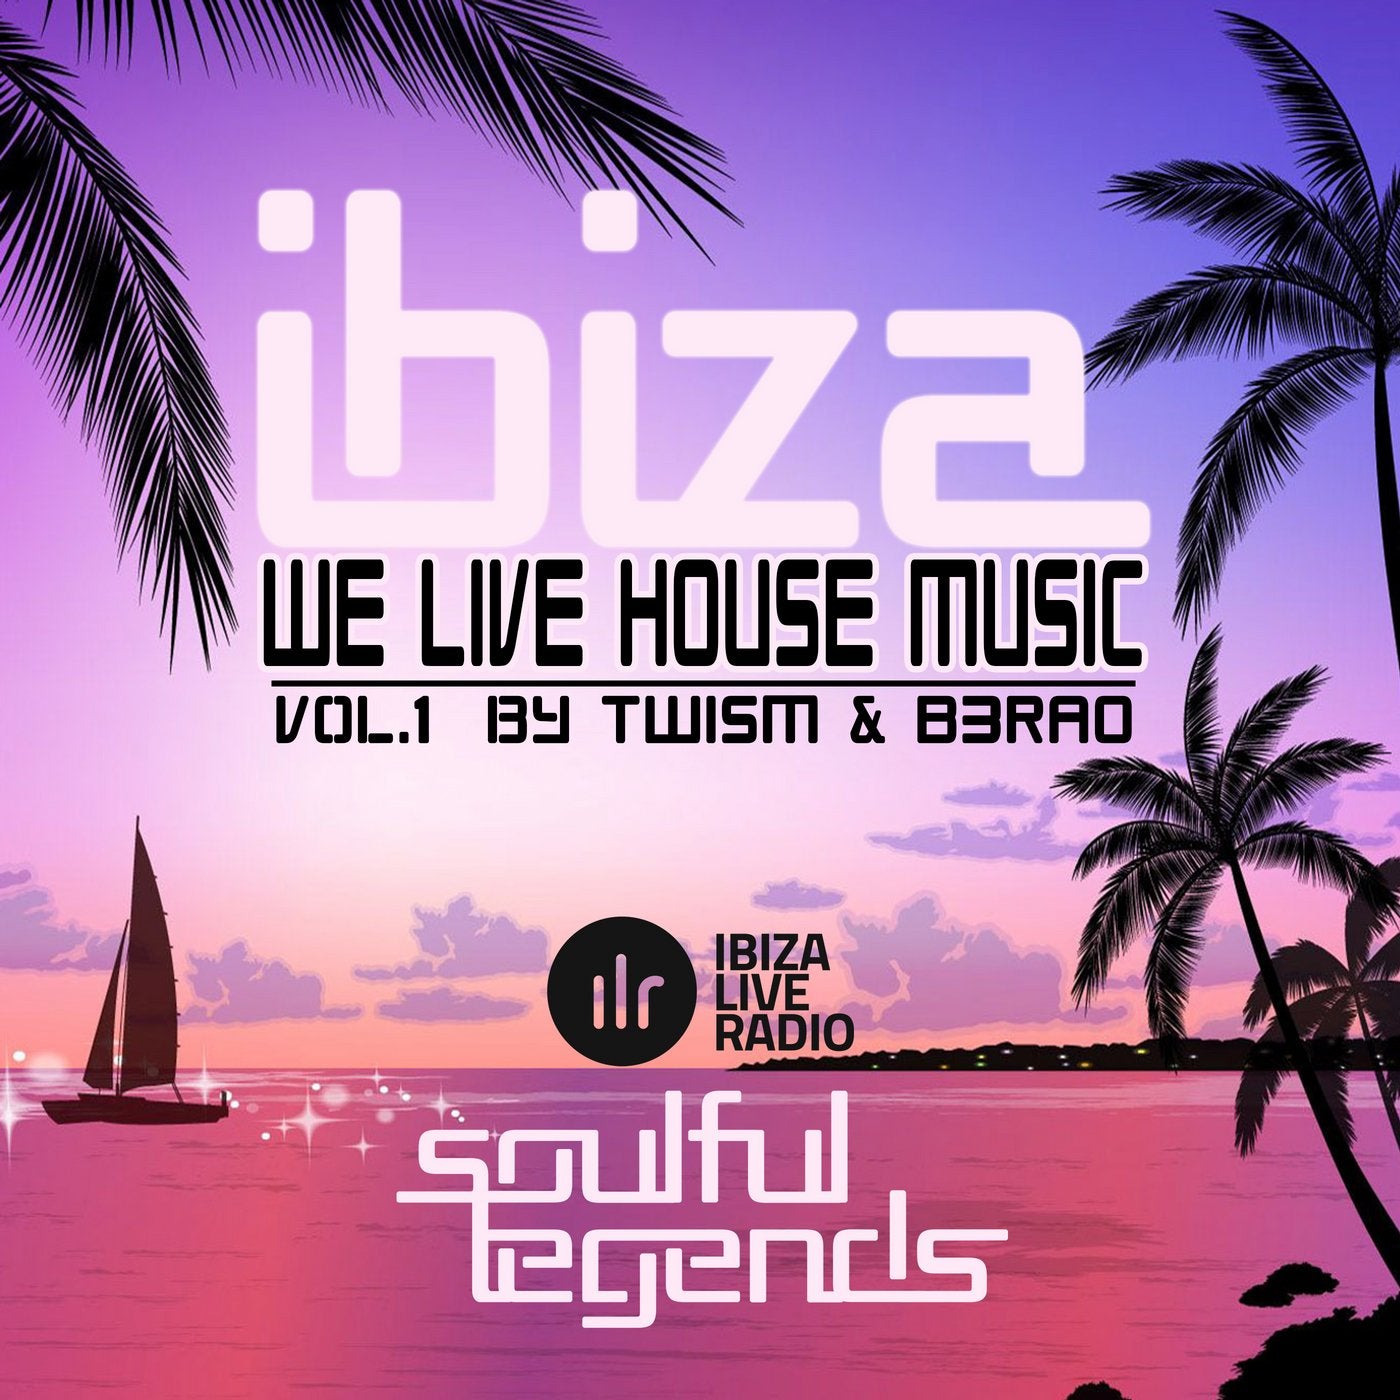 We Live House Music, Vol.1 By Twism & B3RAO